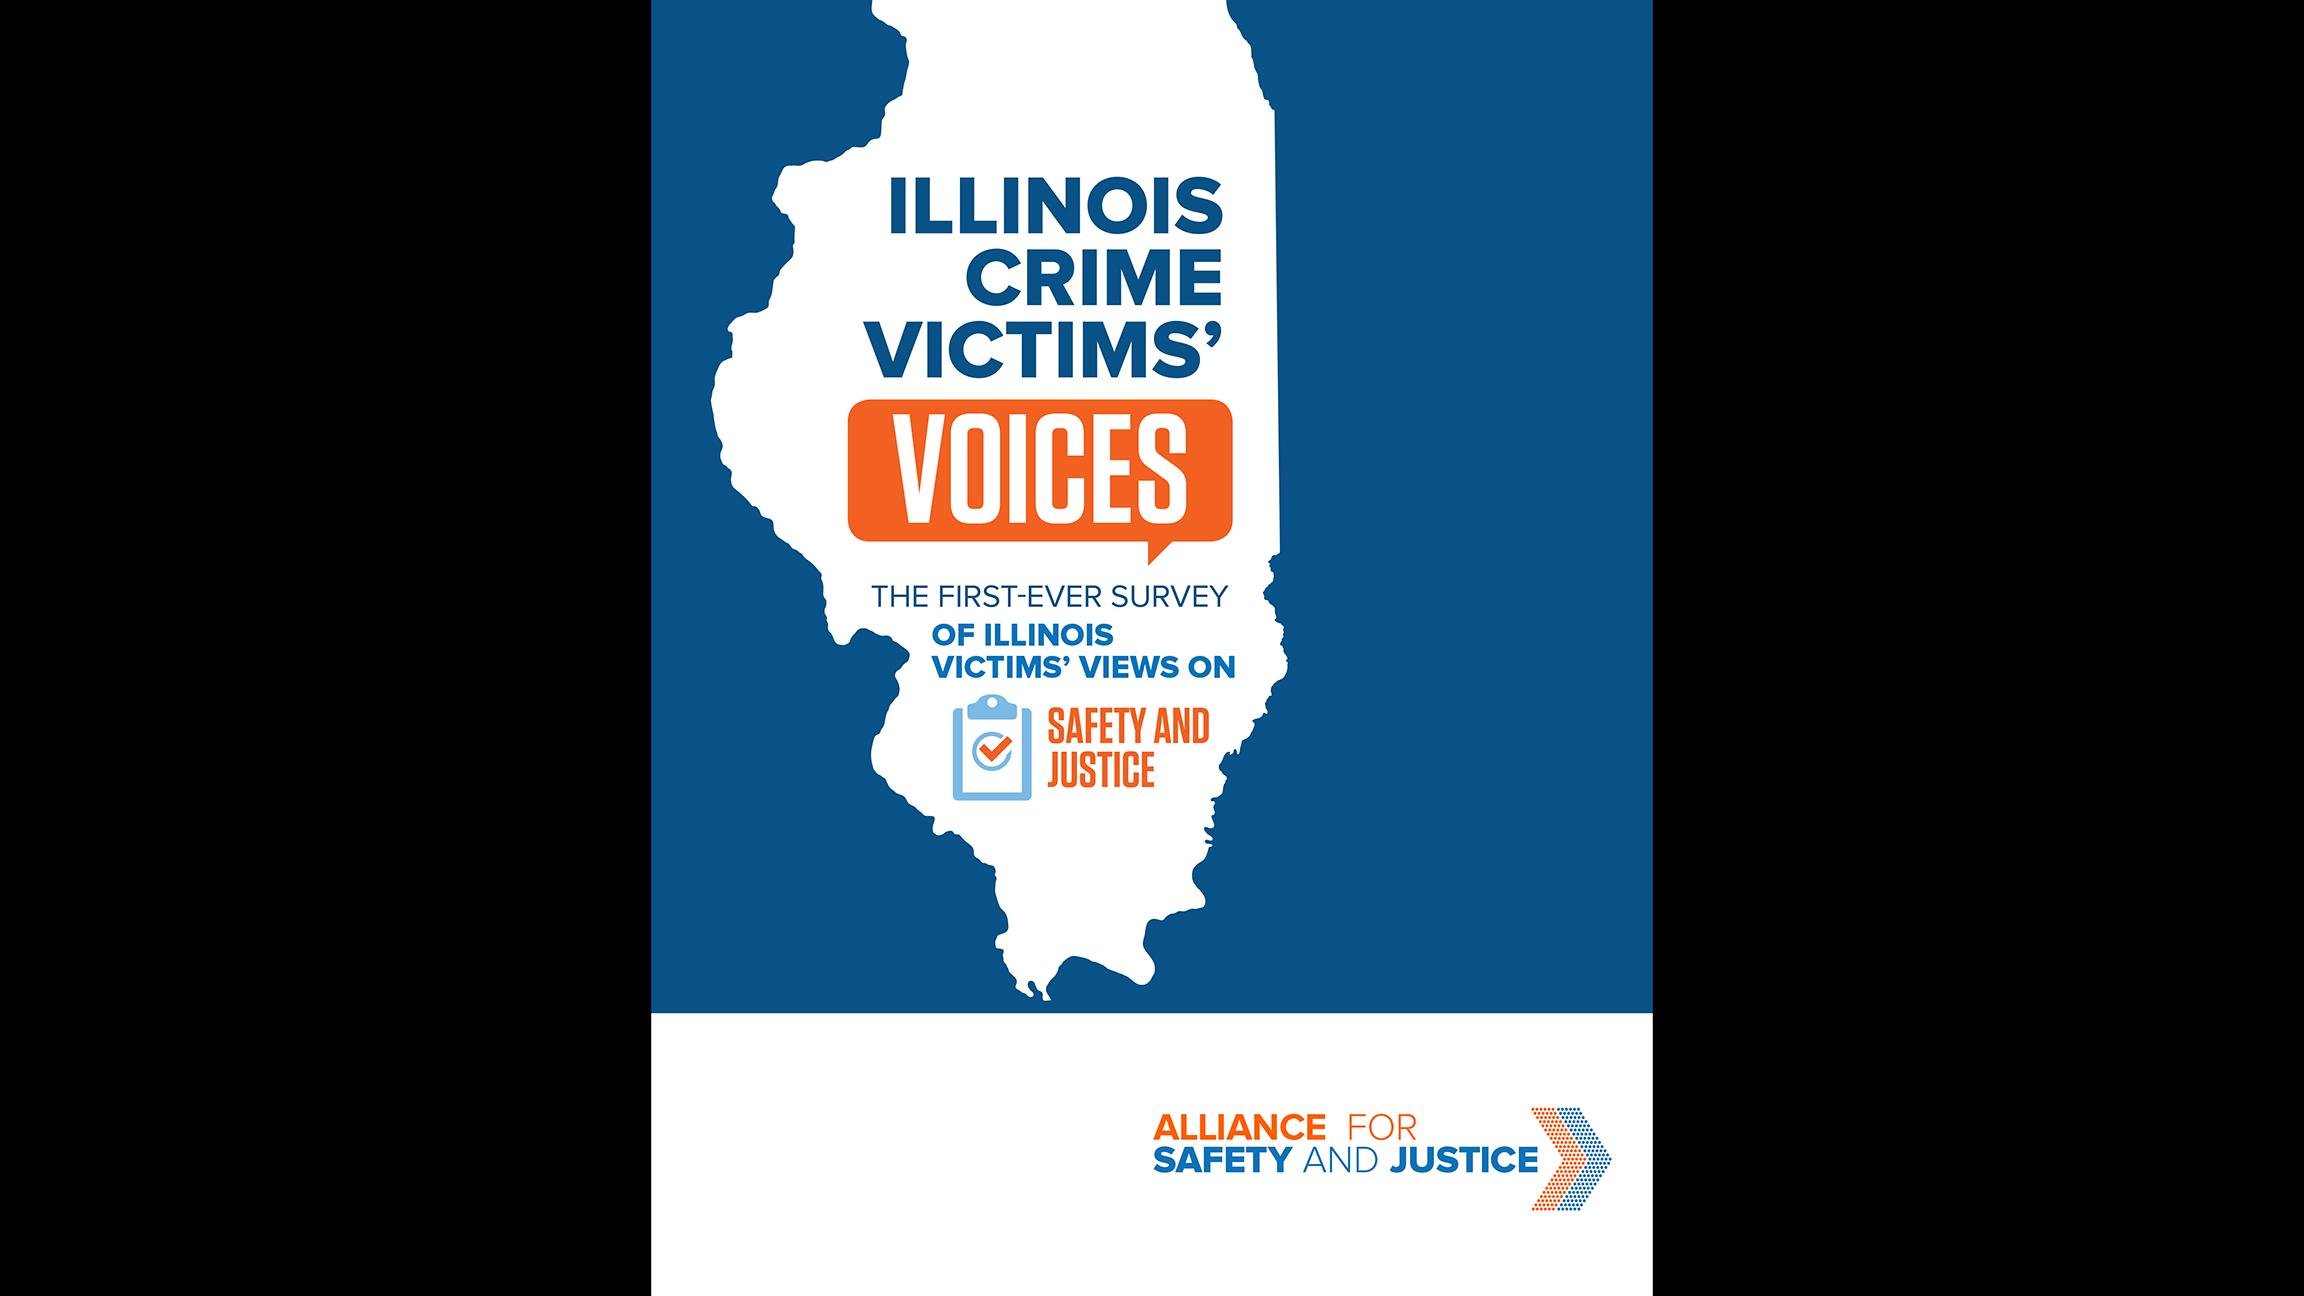 Document: Read the Alliance for Safety and Justice report